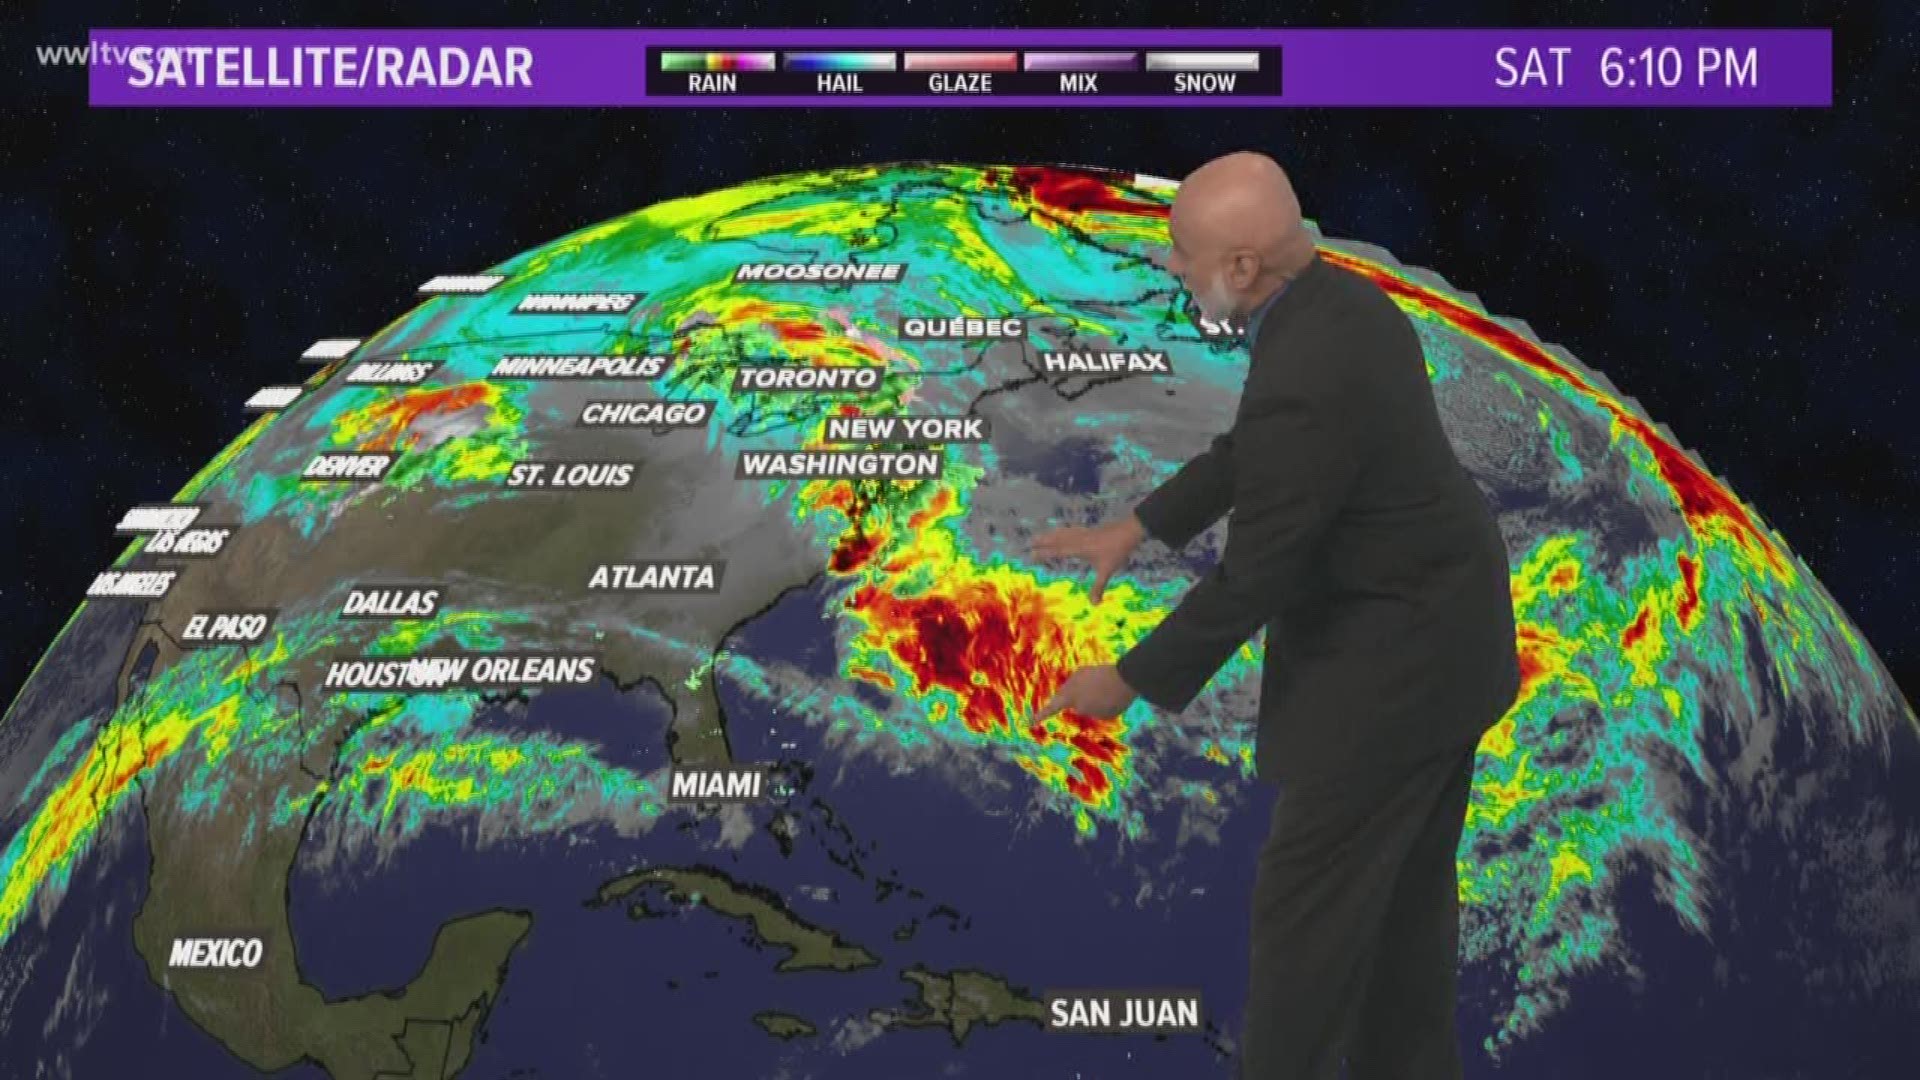 Chief Meteorologist Carl Arredondo and the Saturday Tropical Update